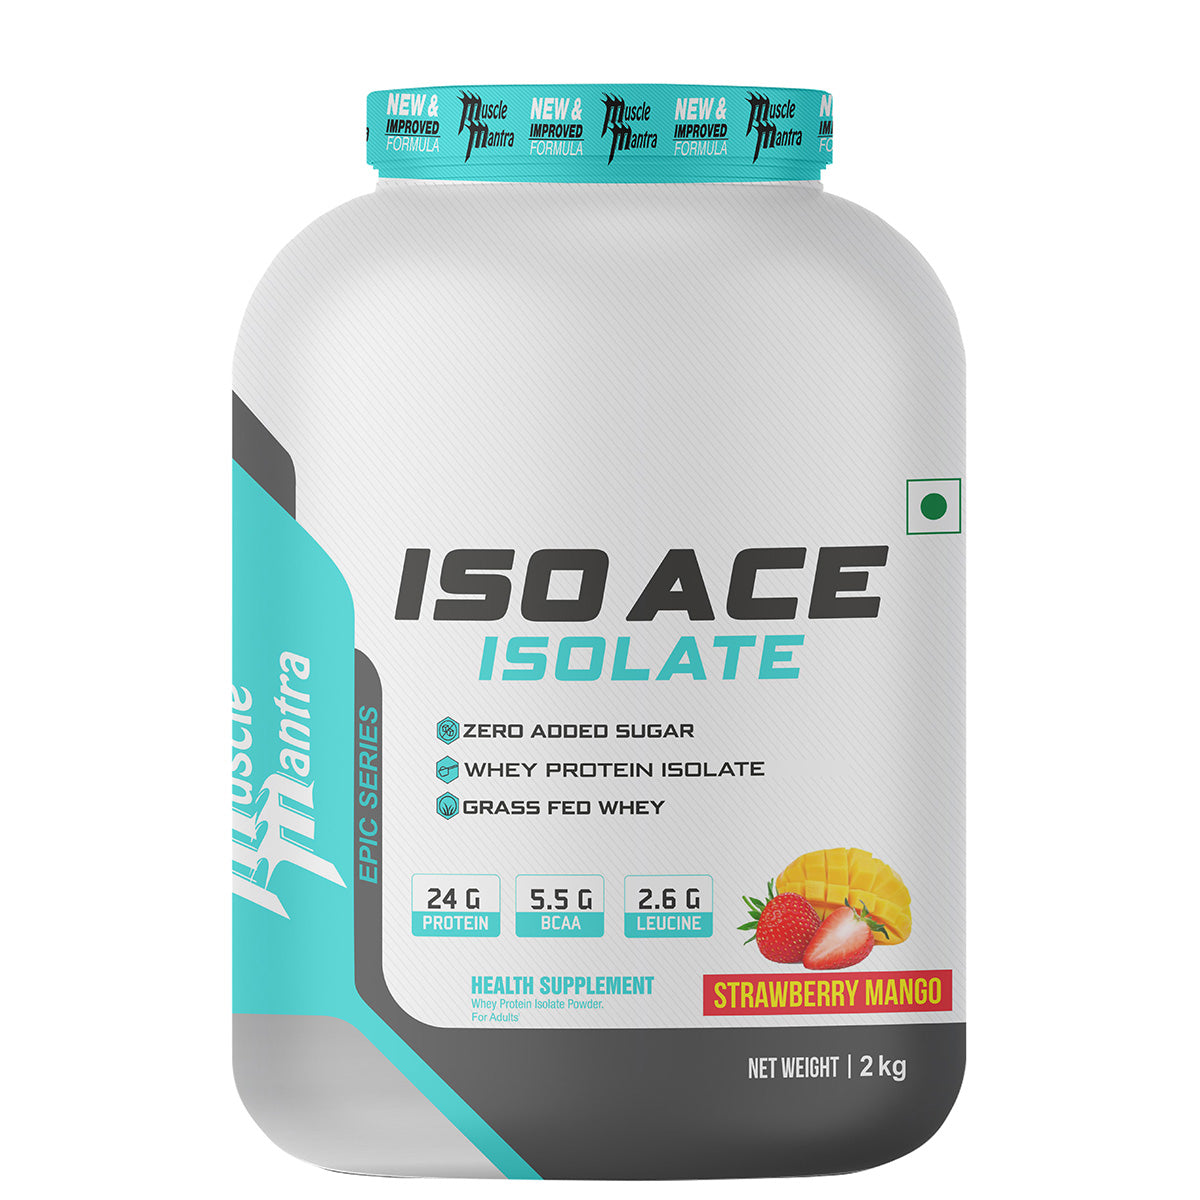 Muscle Mantra Epic Series ISO ACE ISOLATE For Build | Repair | Recovery